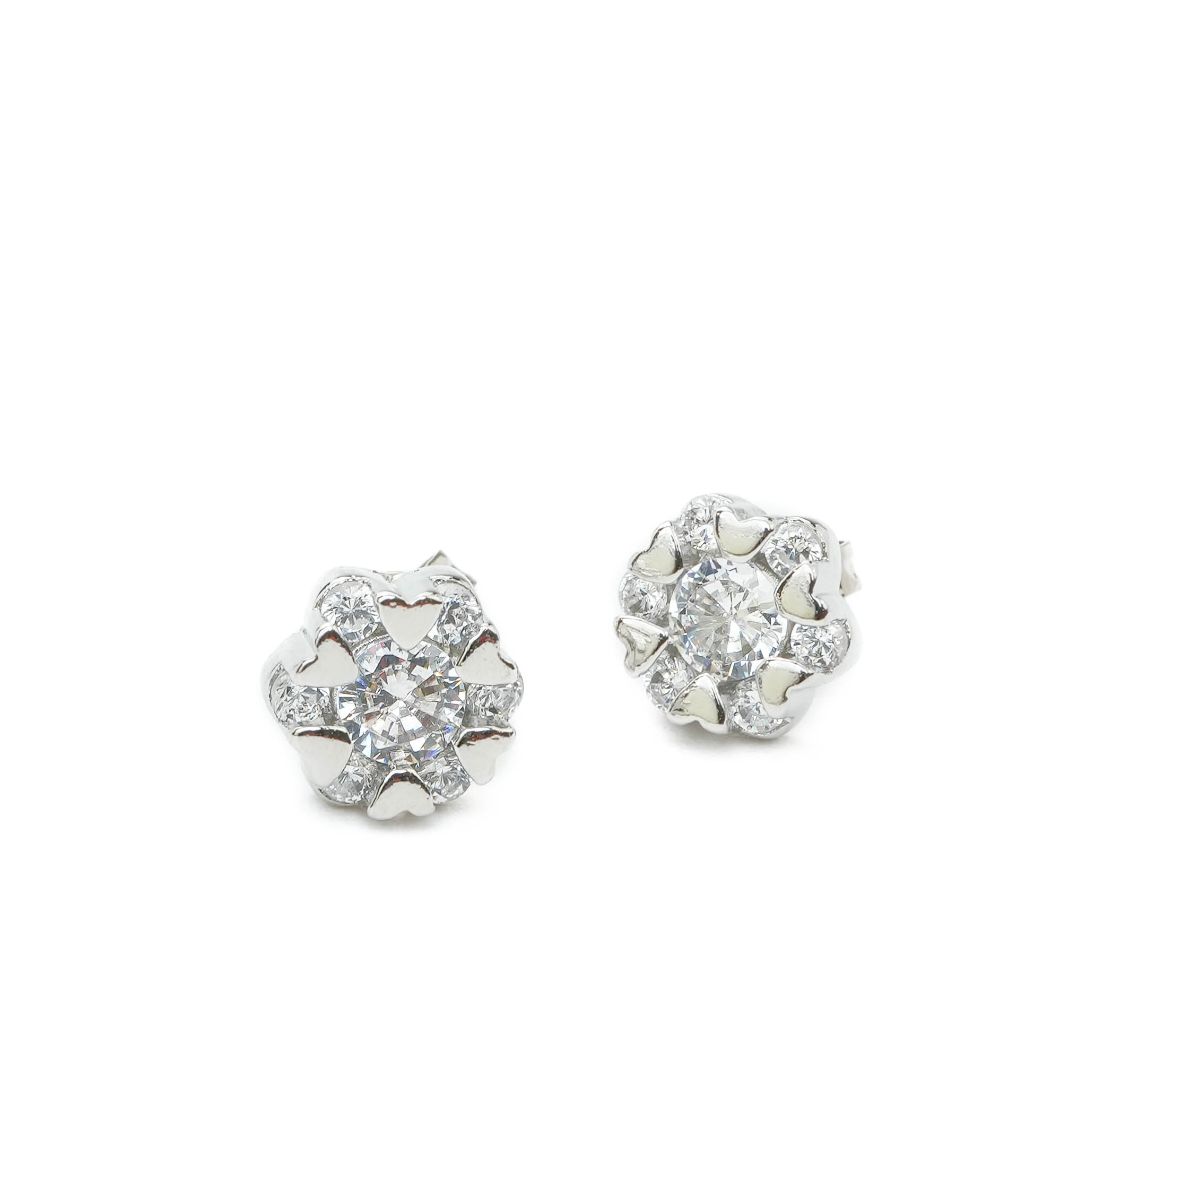 https://m.clubbella.co/product/ariah-edelweiss-sterling-silver-earrings/ Ariah Edelweiss Sterling Earrings (2)